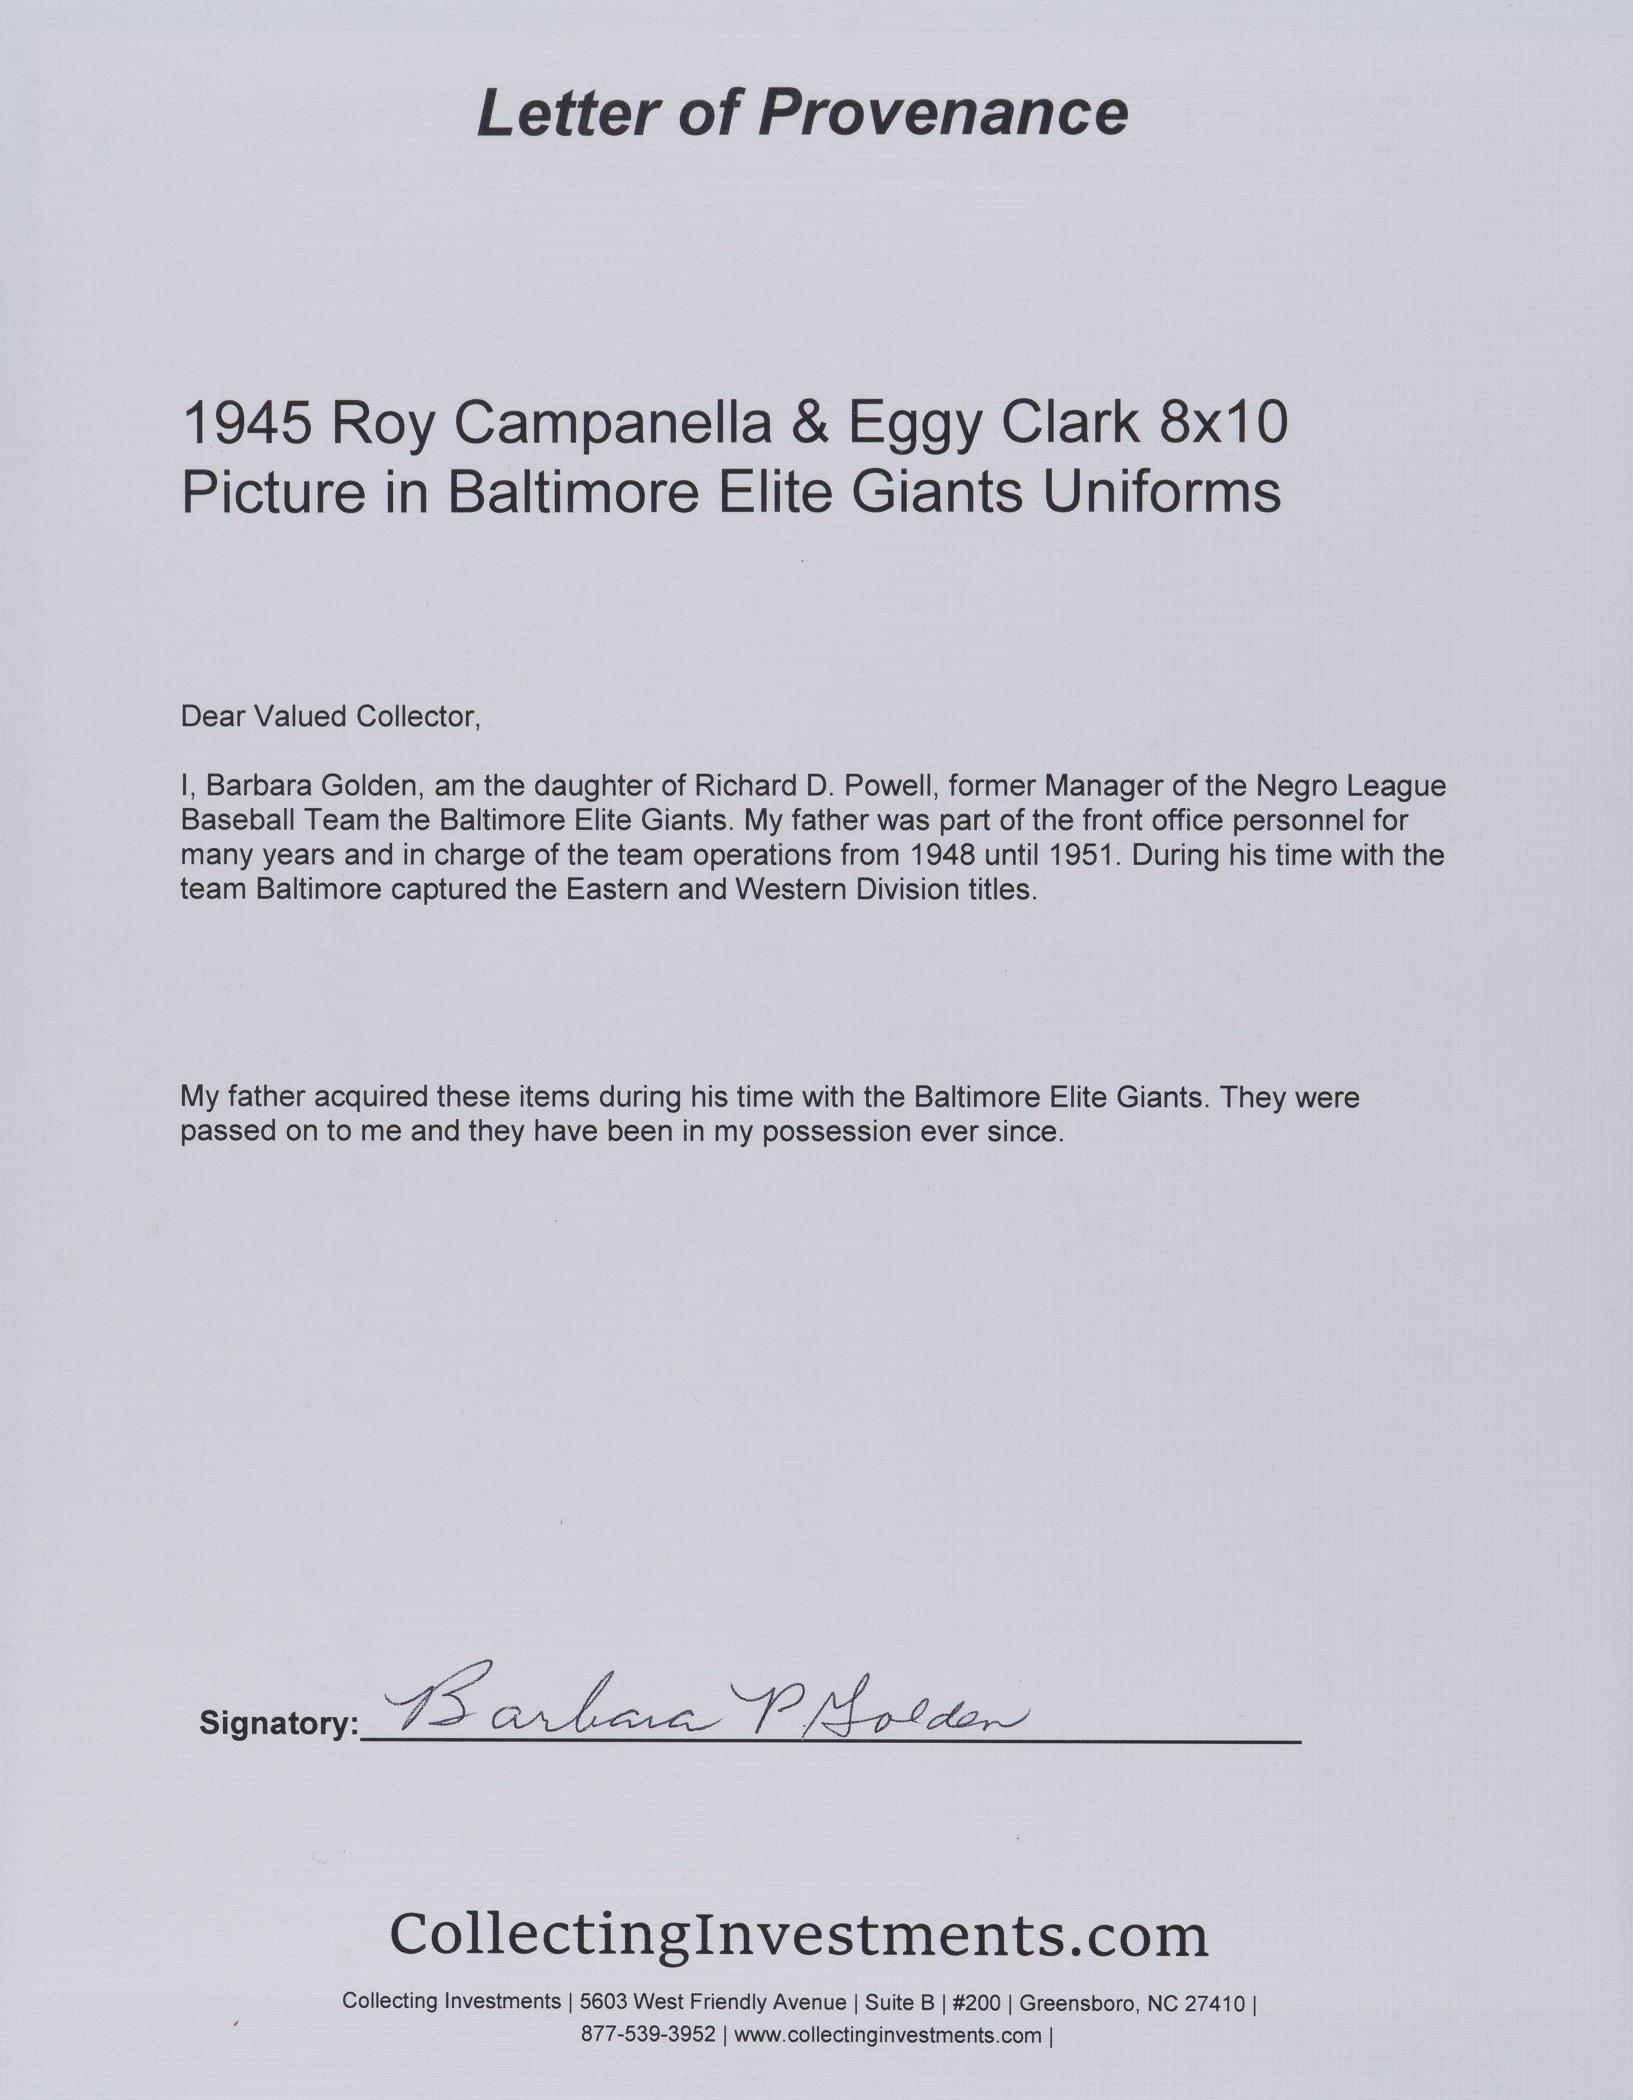 Roy Campanella Archives - Negro Leagues History